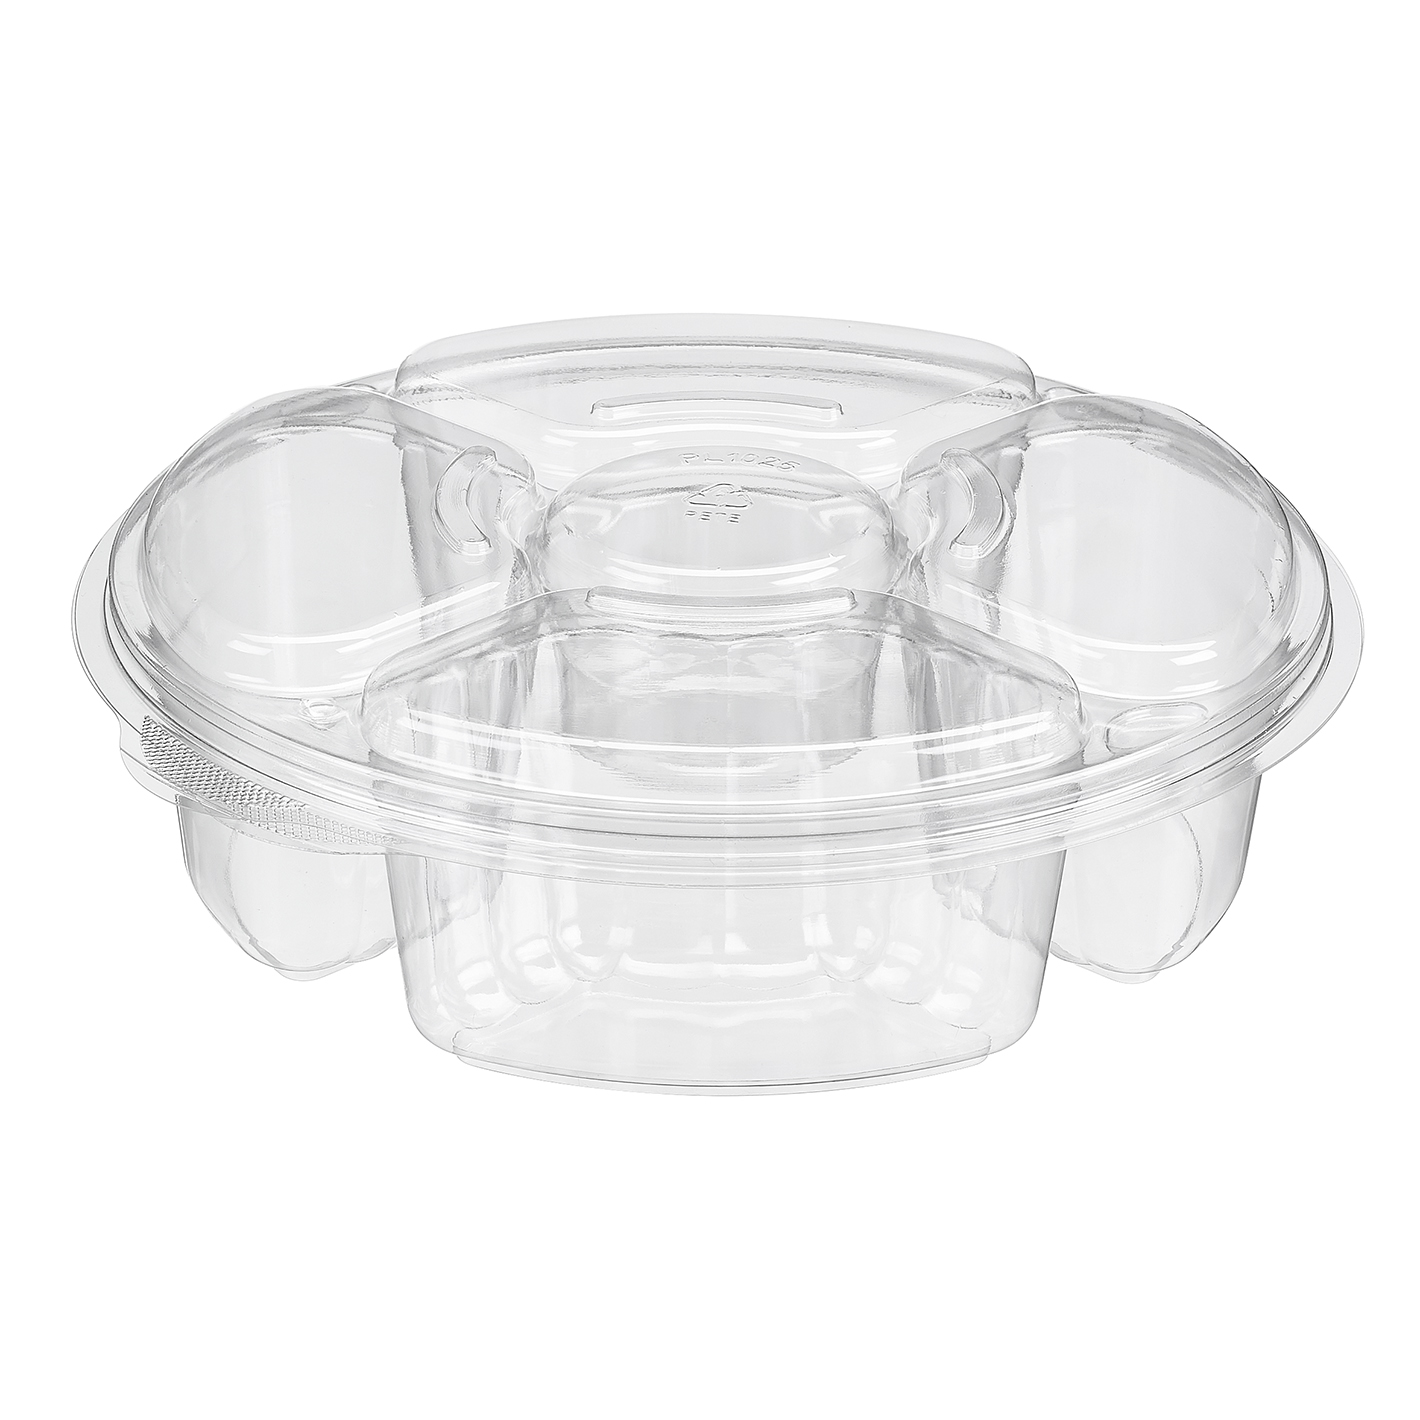 10.25 PRODUCE TRAY W/CUP 4 COMPARTMENT 100/CASE PLO65C